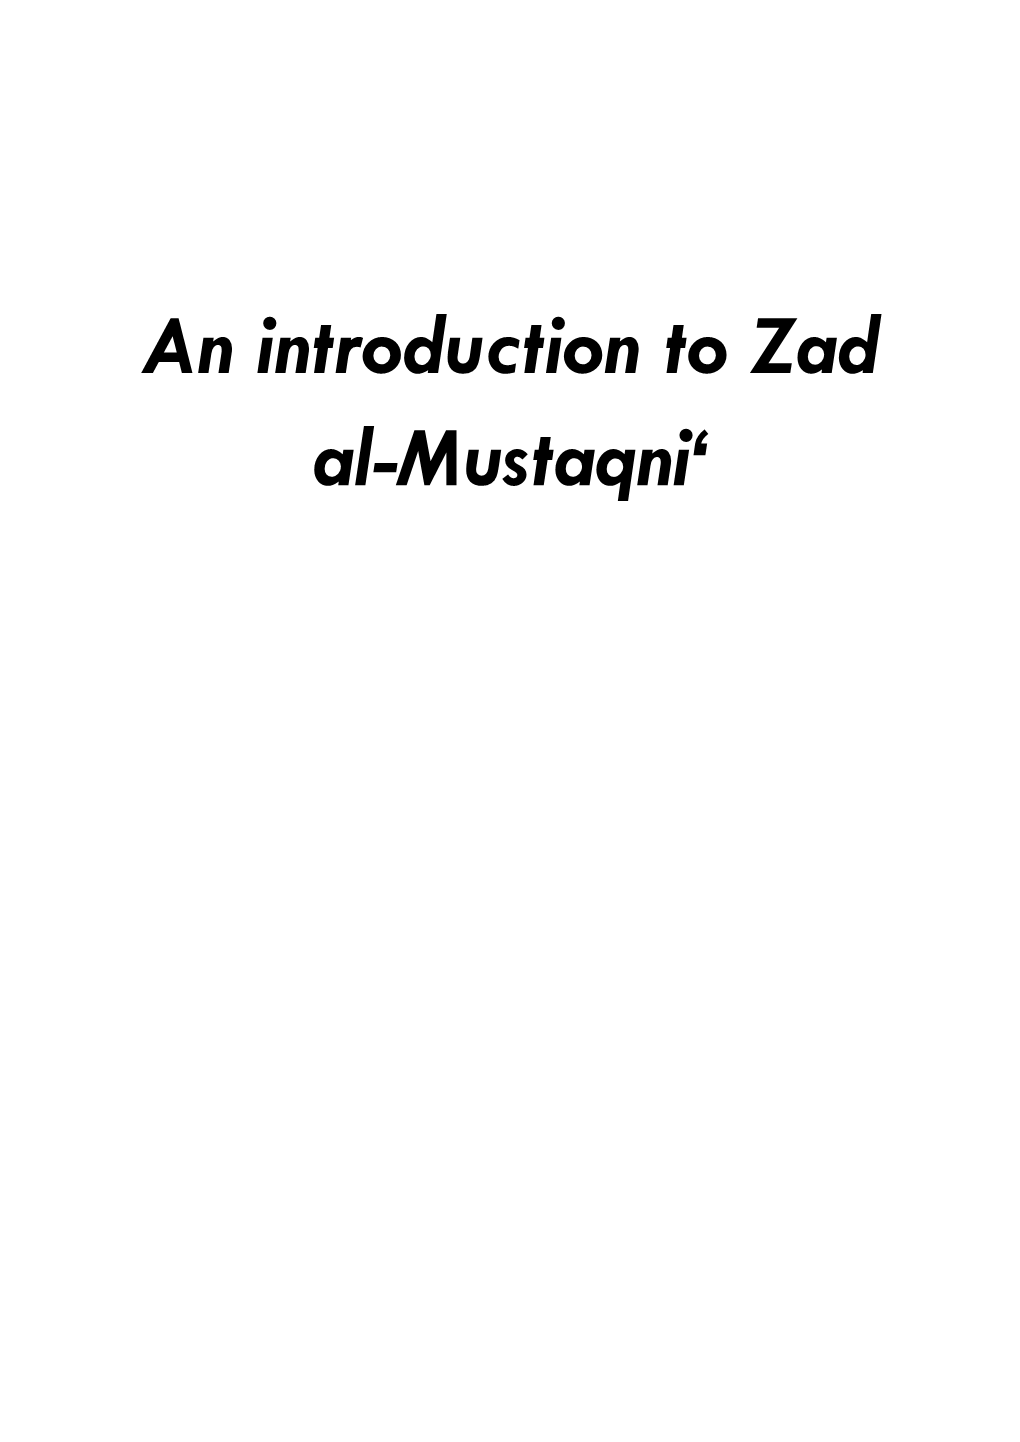 An Introduction to Zad Al-Mustaqni'